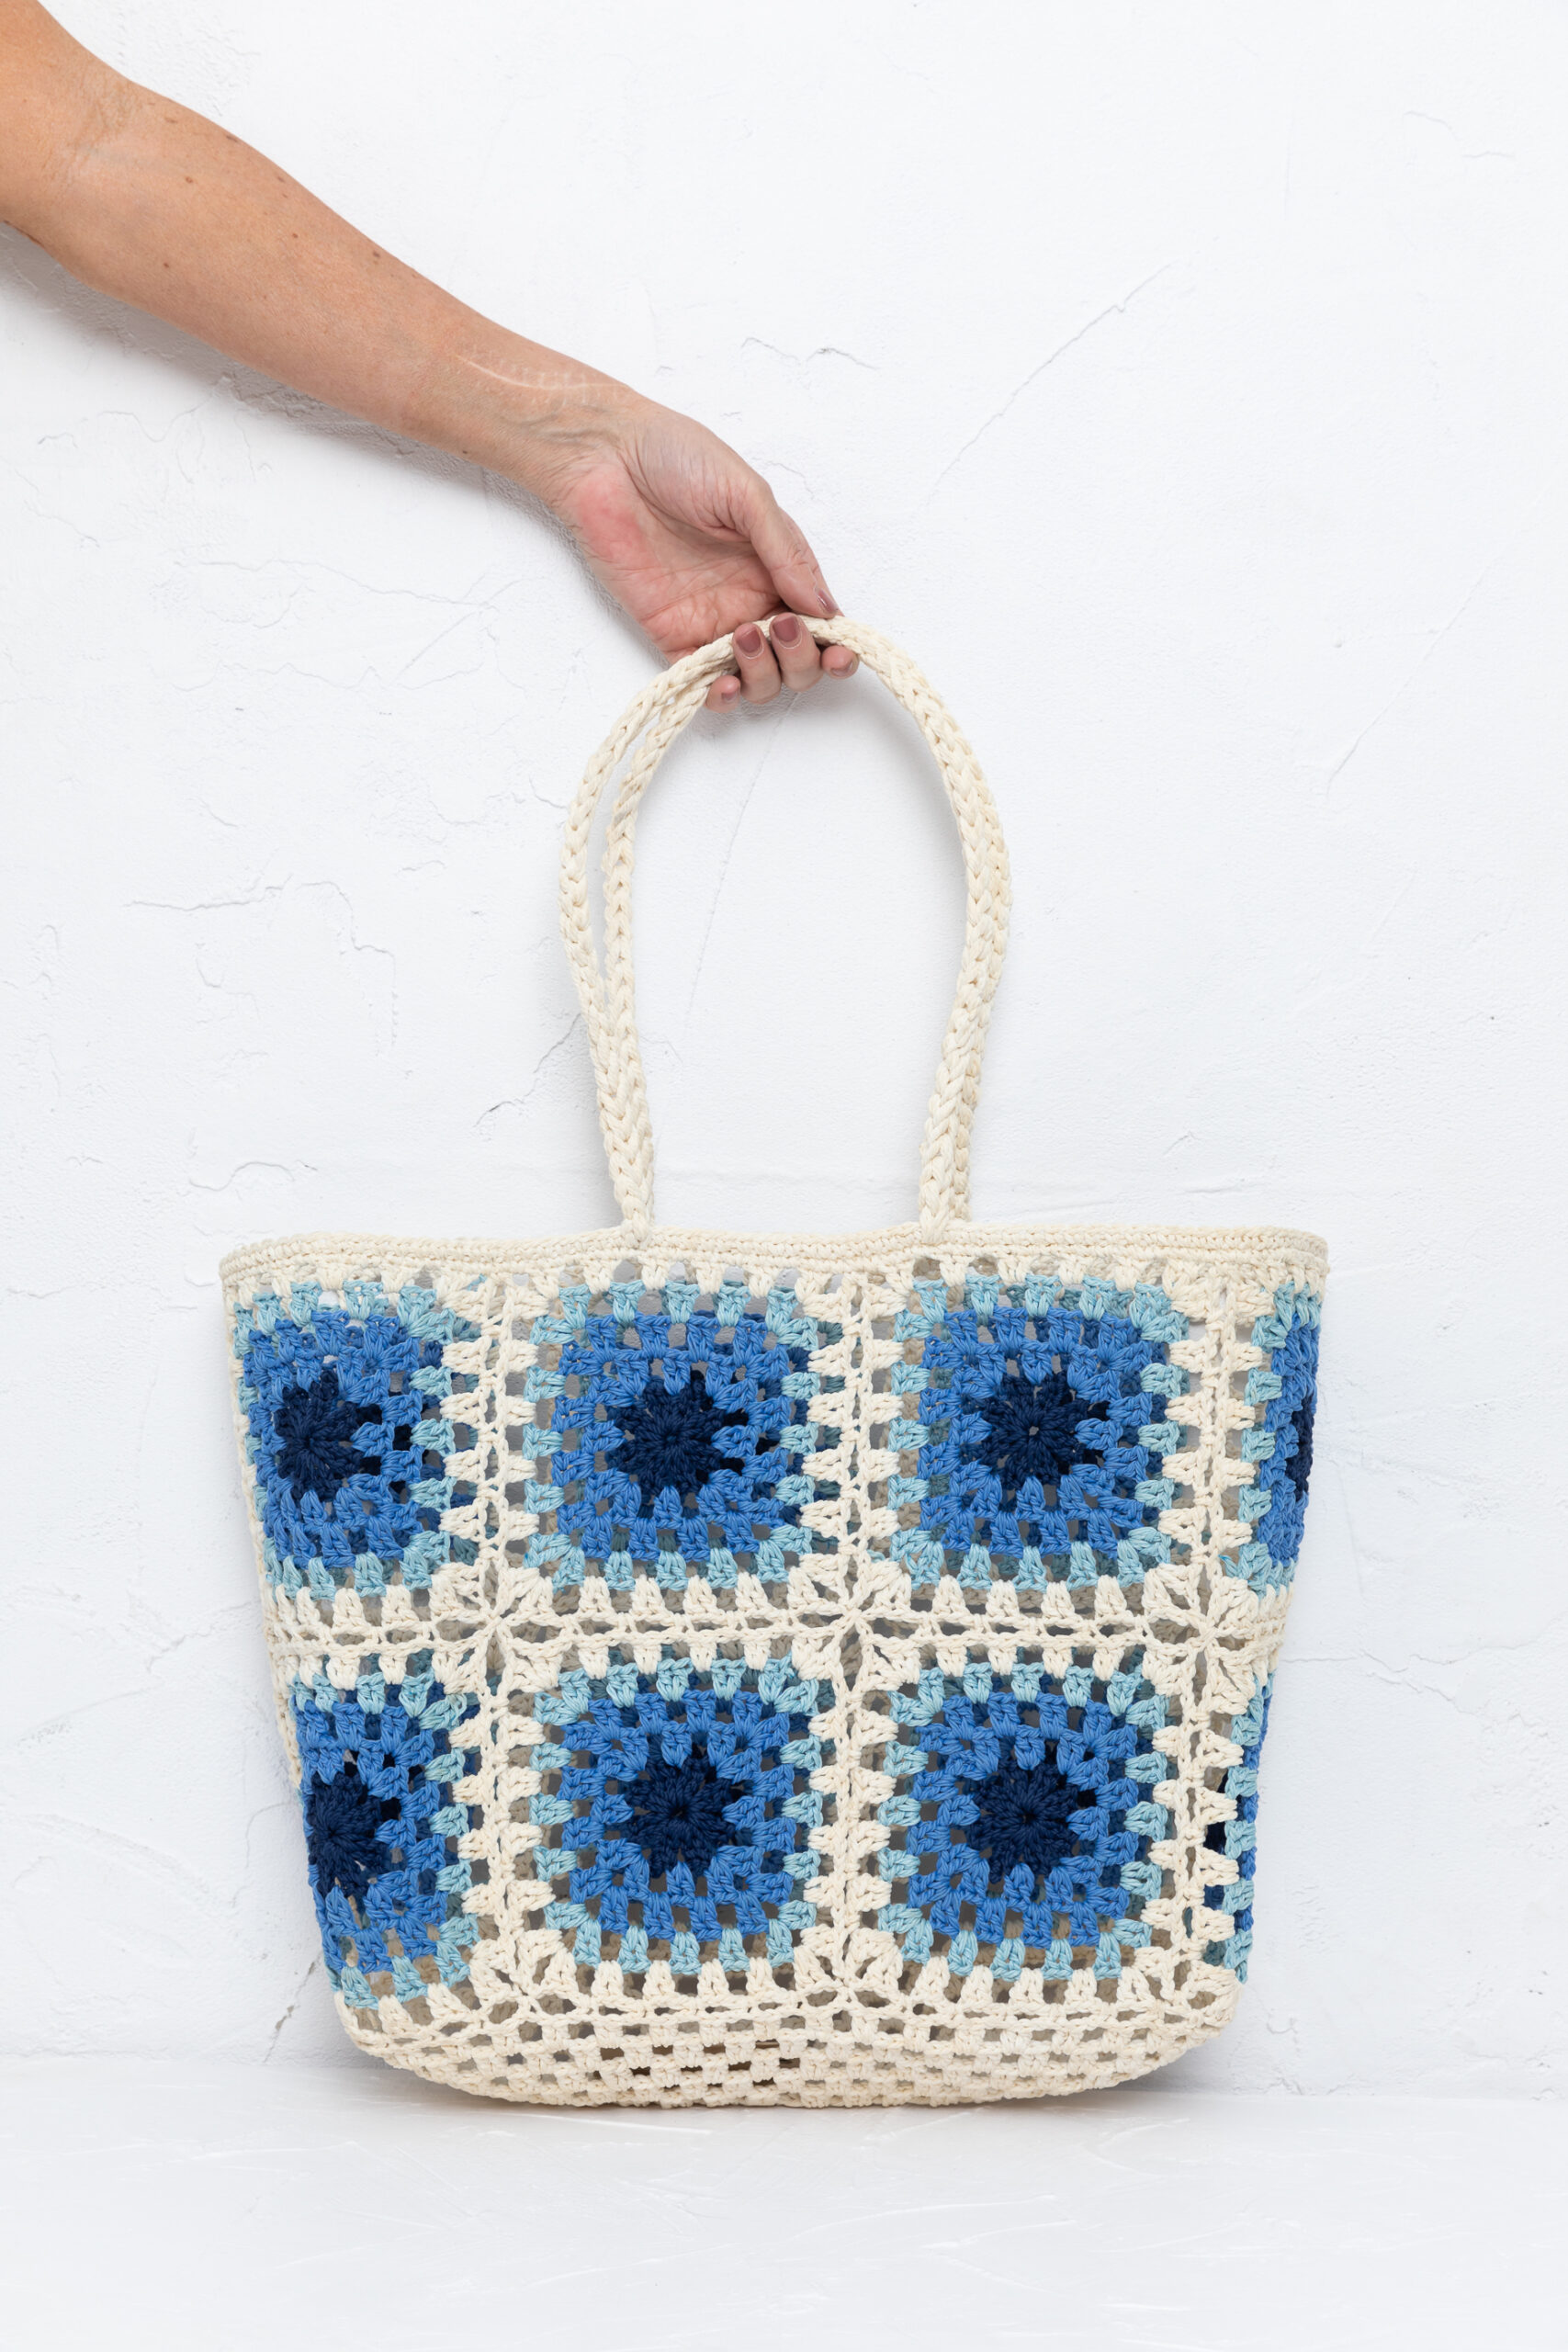 Crochet style tote bag in blue and crea